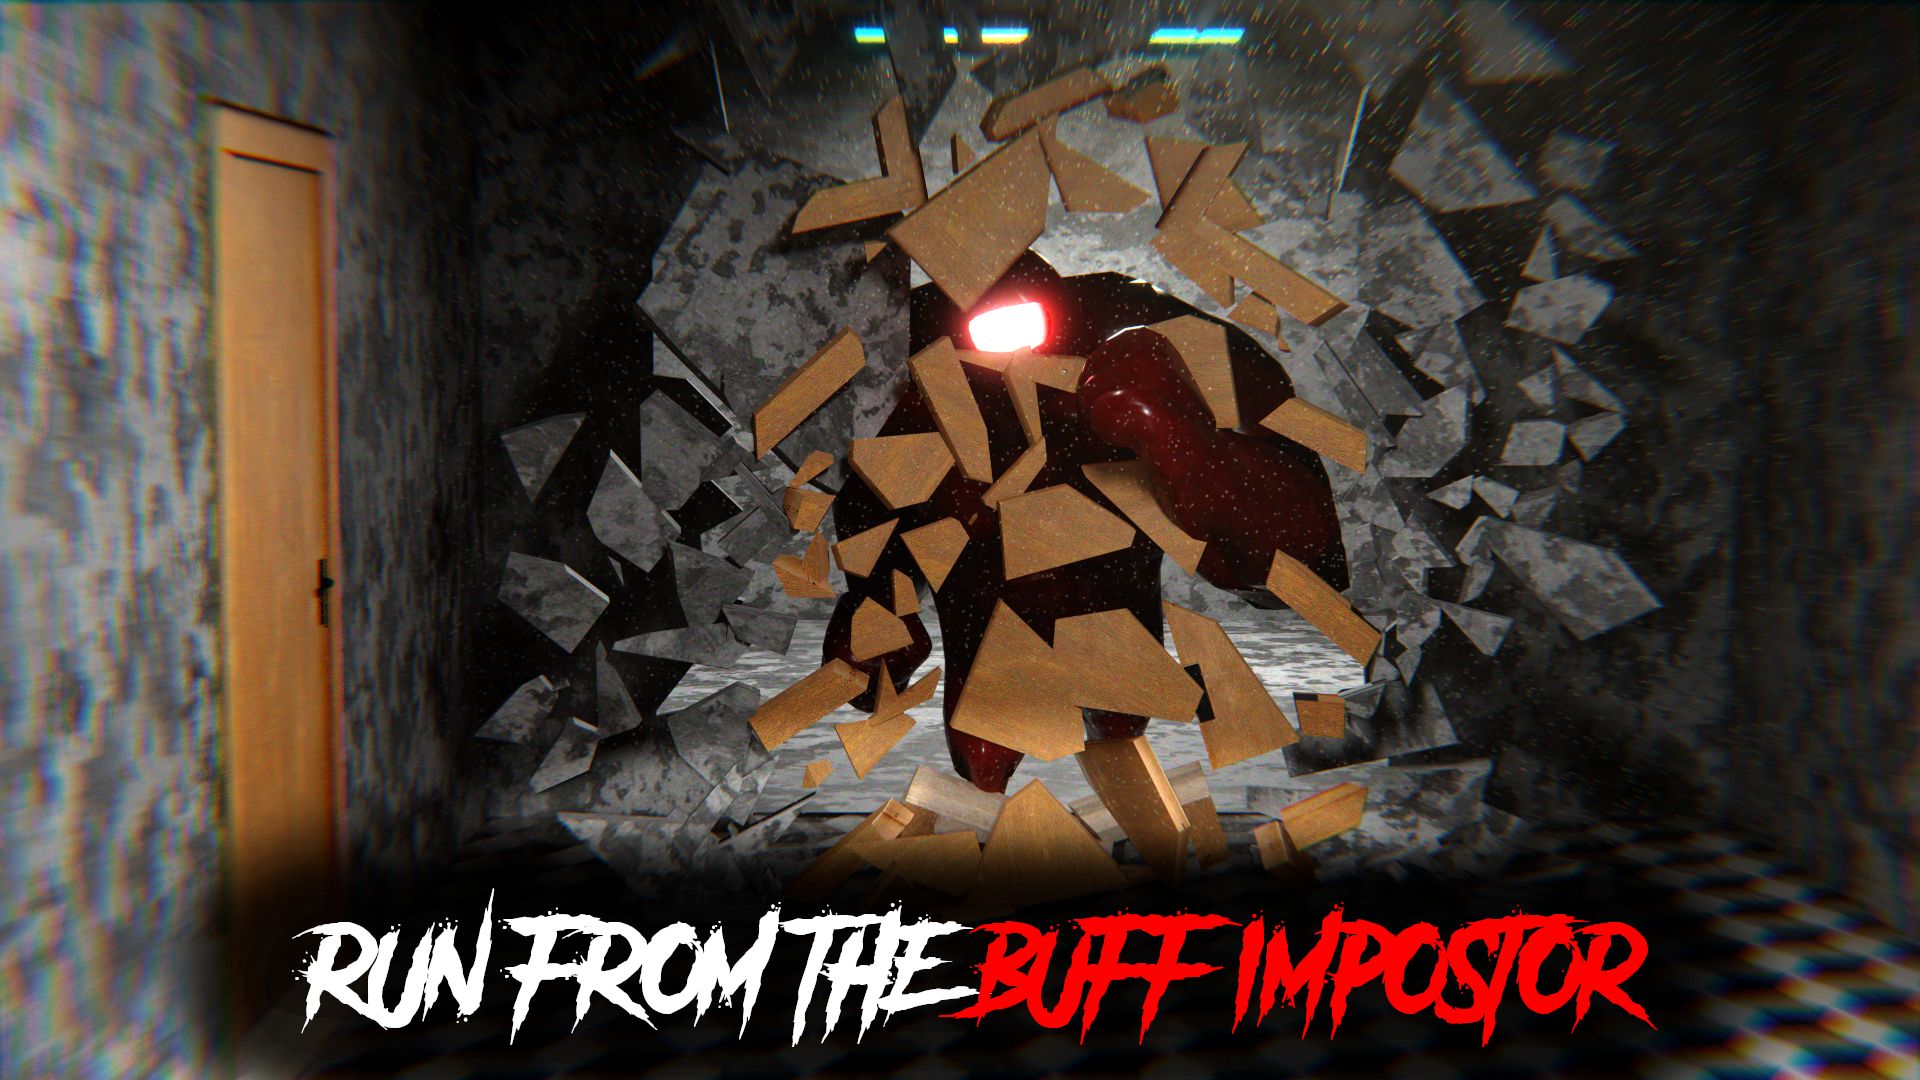 Scarica Buff Imposter Scary Creepy Horror gratis per Android.